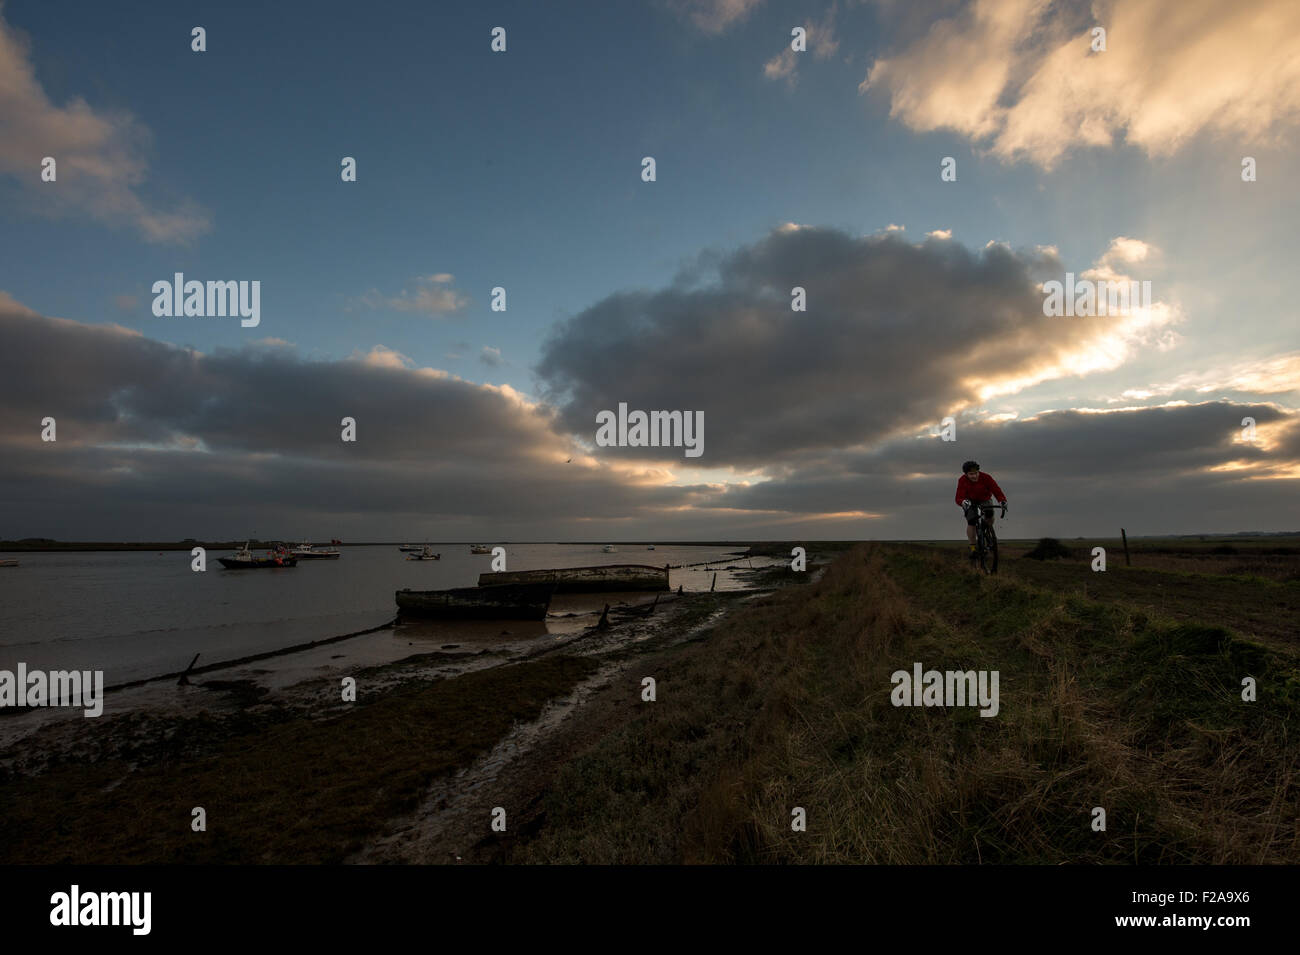 Cycling in the River Alde Estuary,Orford, Suffolk, England Stock Photo